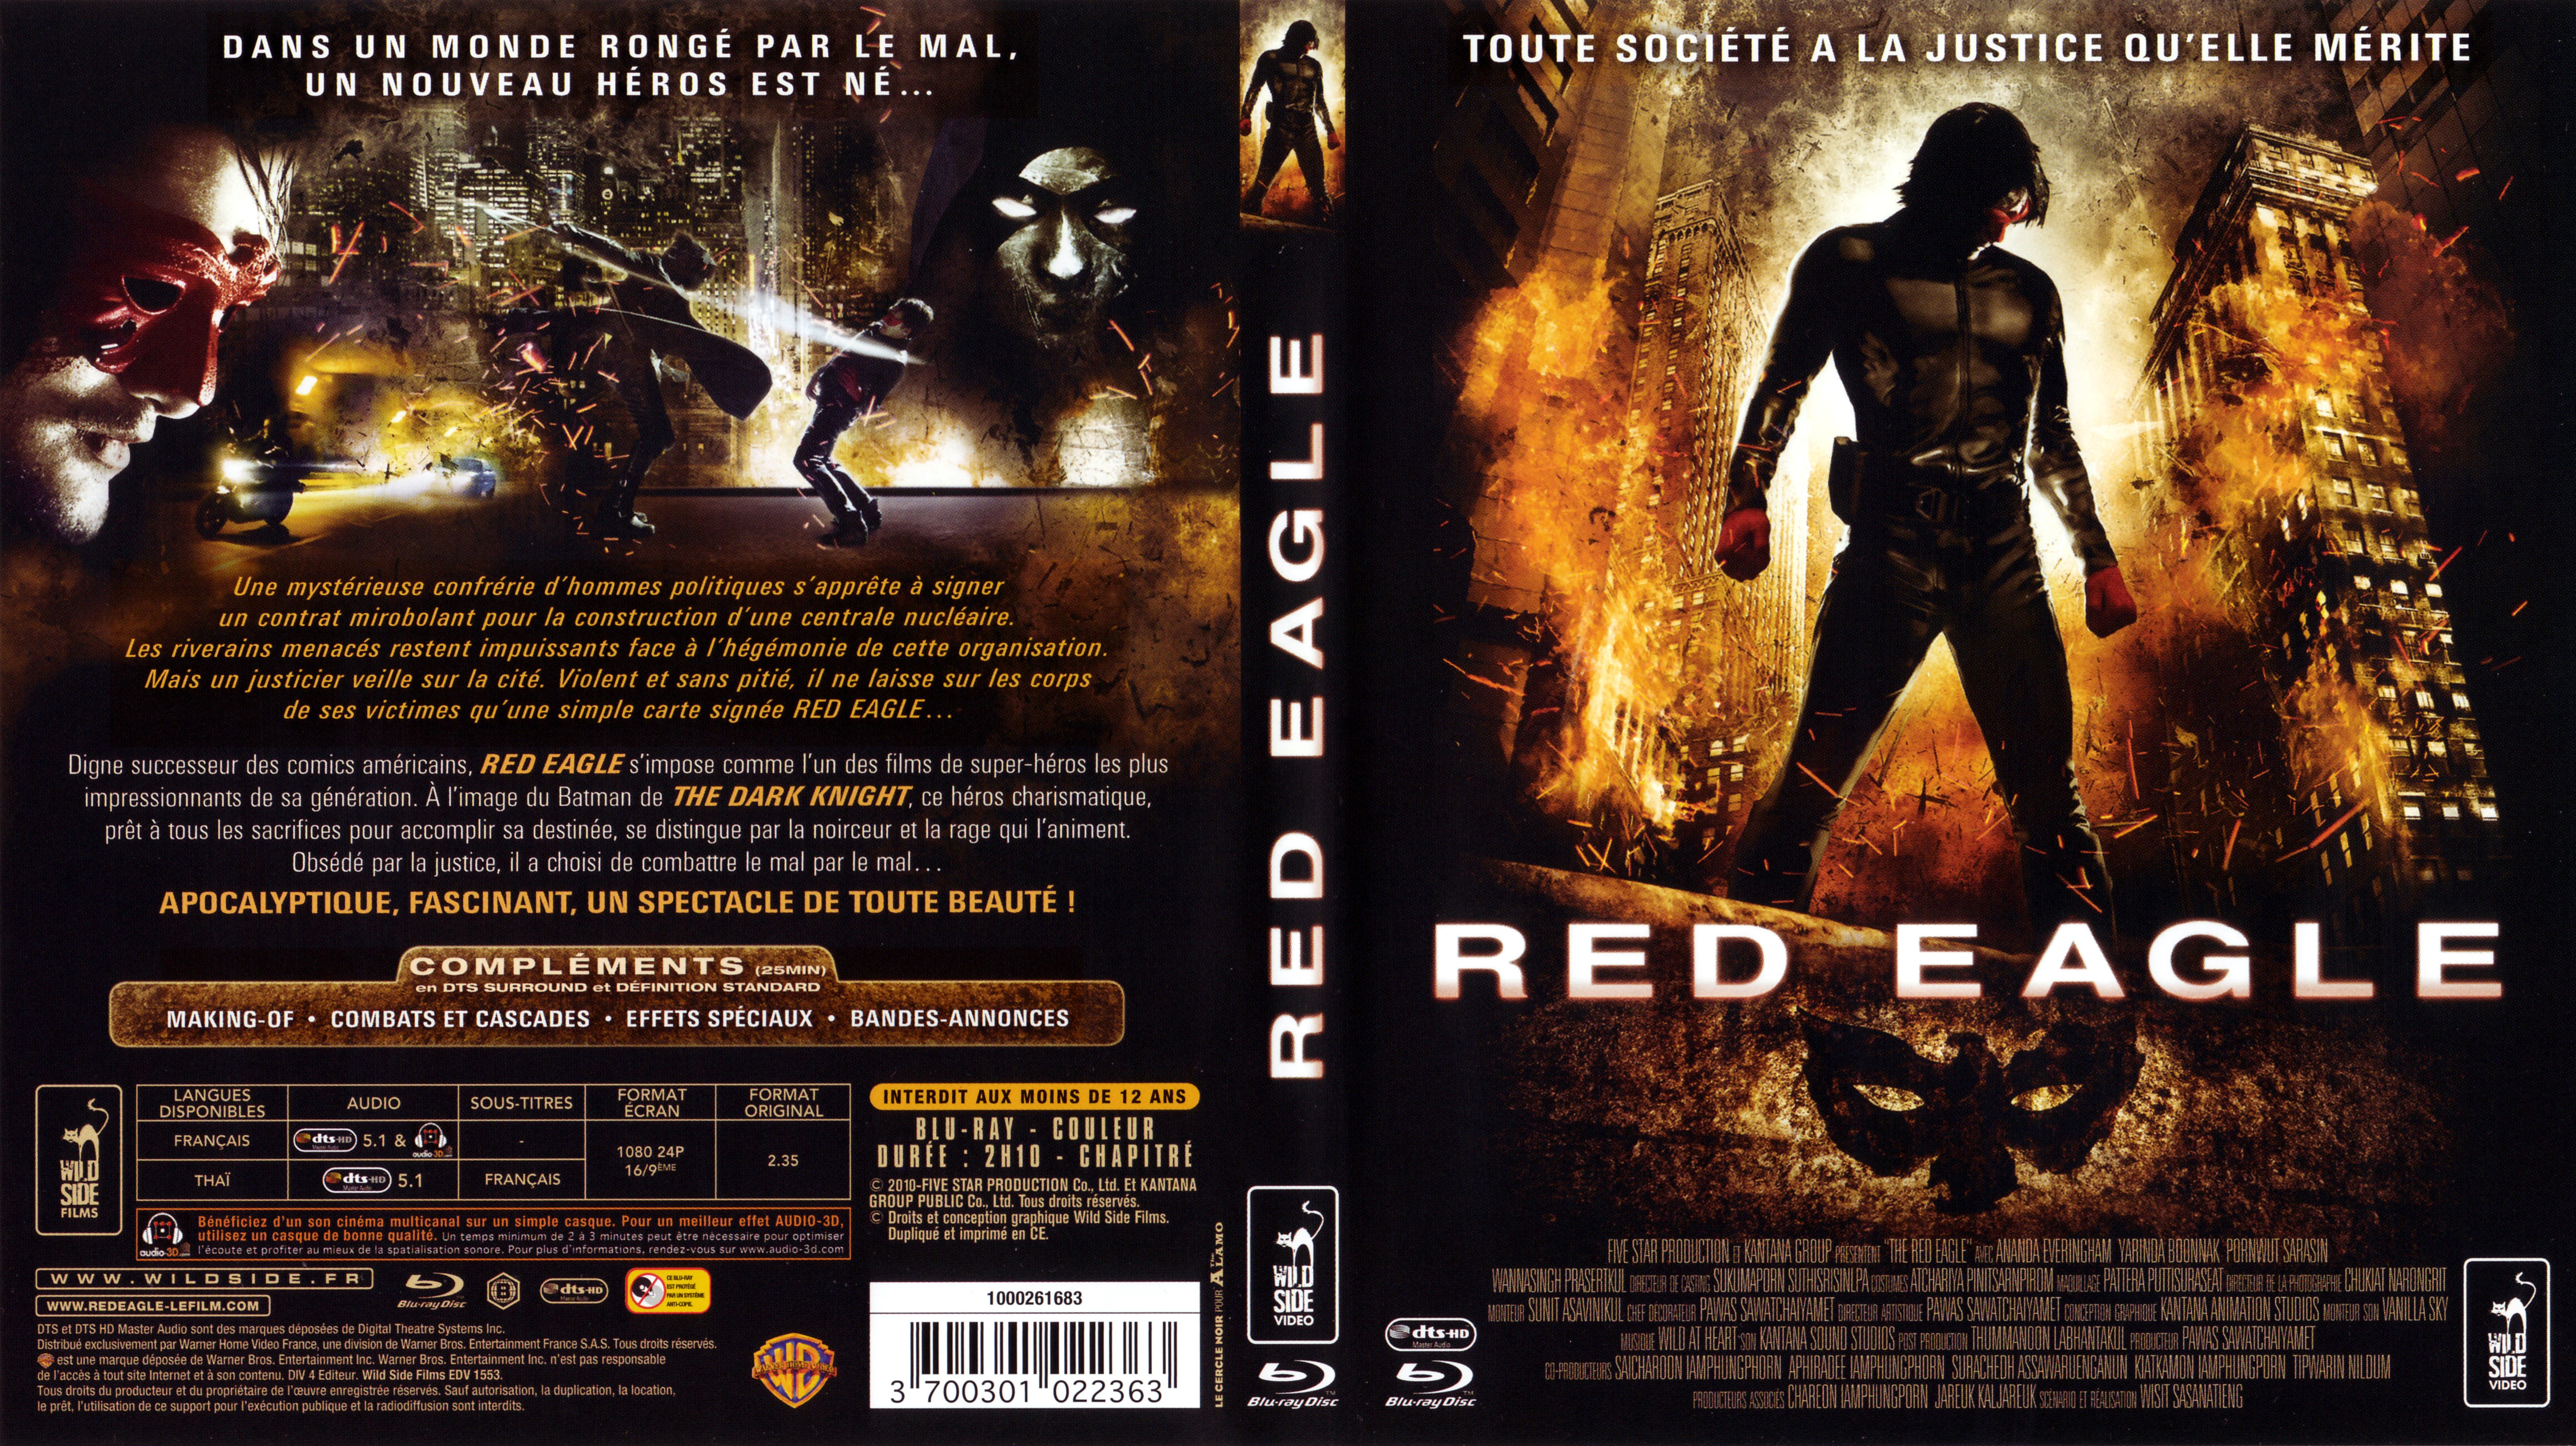 Jaquette DVD Red eagle (BLU-RAY) v2